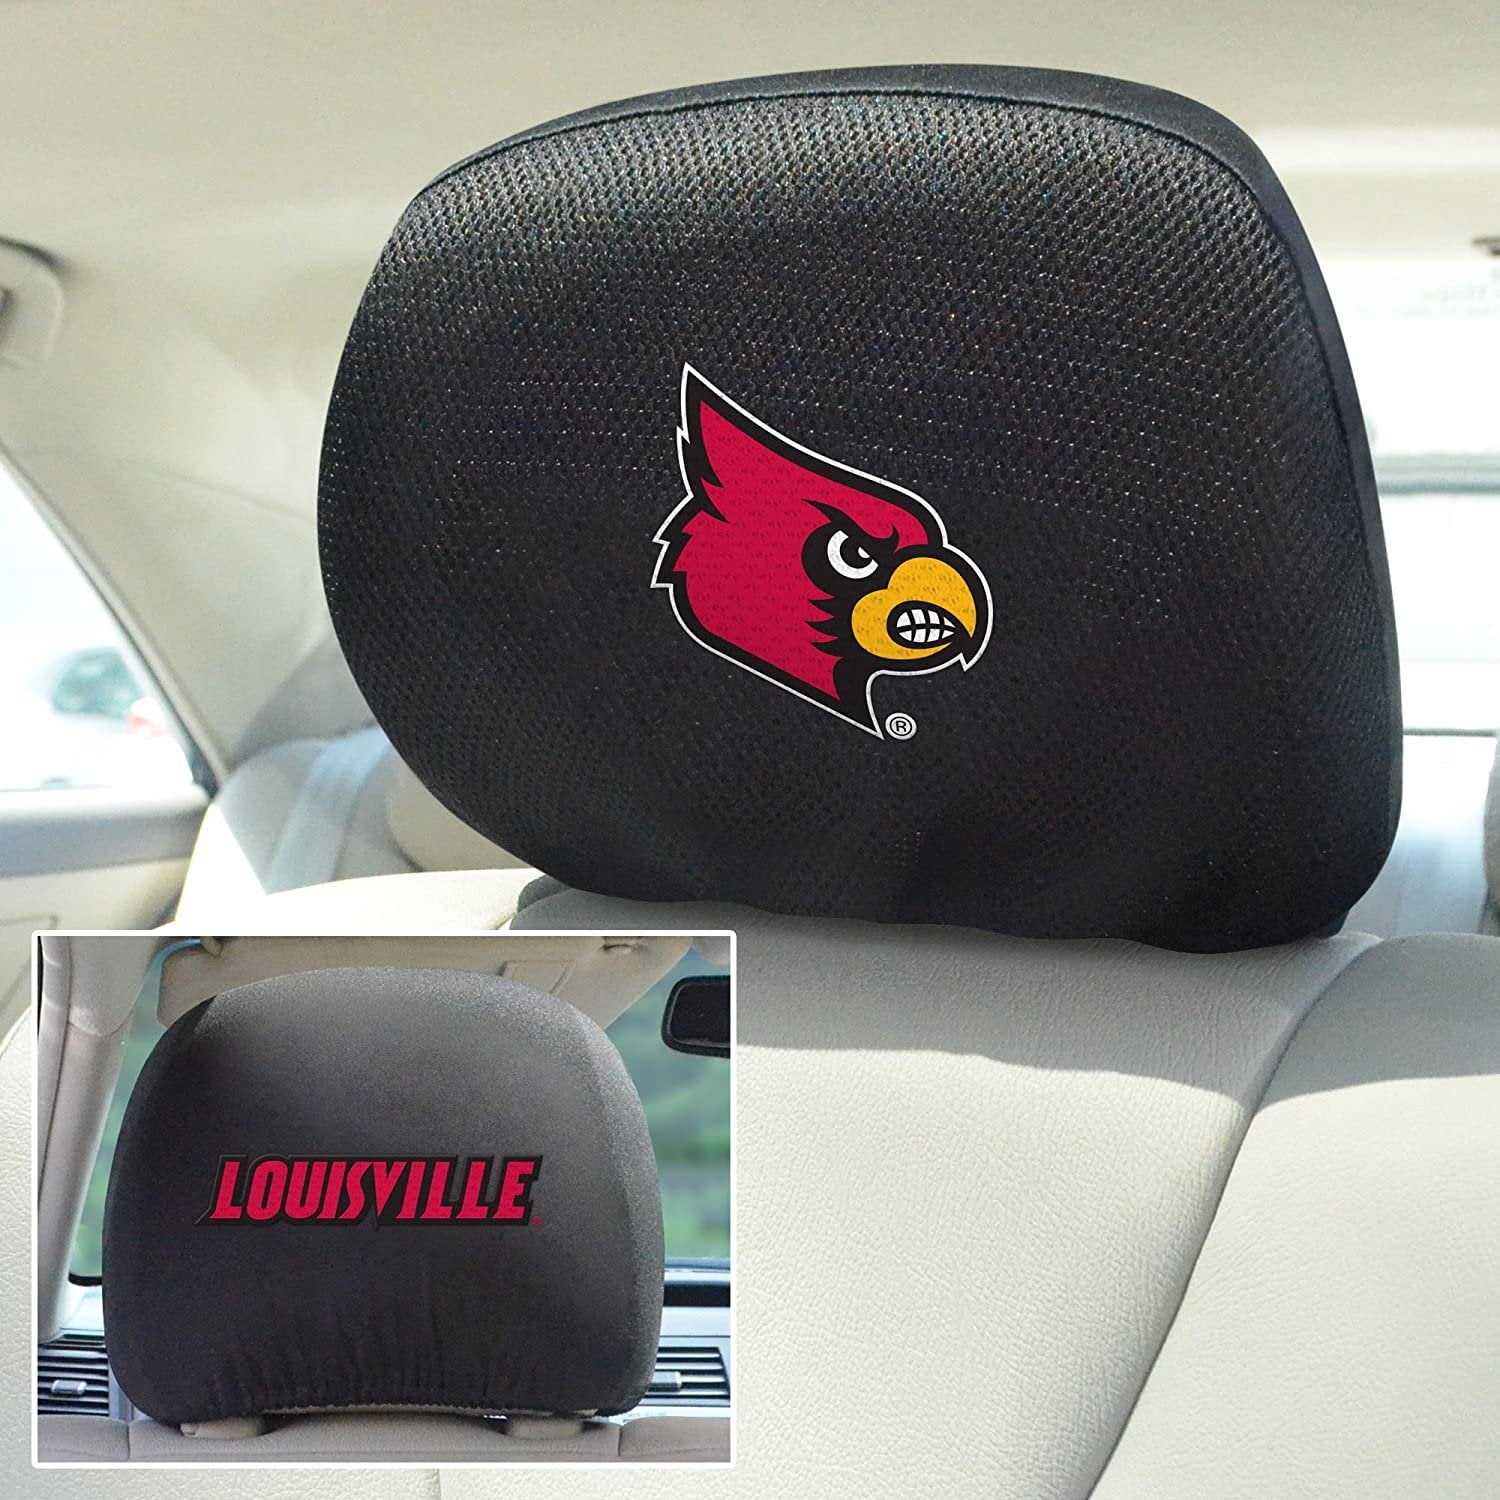 University of Louisville Cardinals Pair of Premium Auto Head Rest Covers, Embroidered, Black Elastic, 14x10 Inch